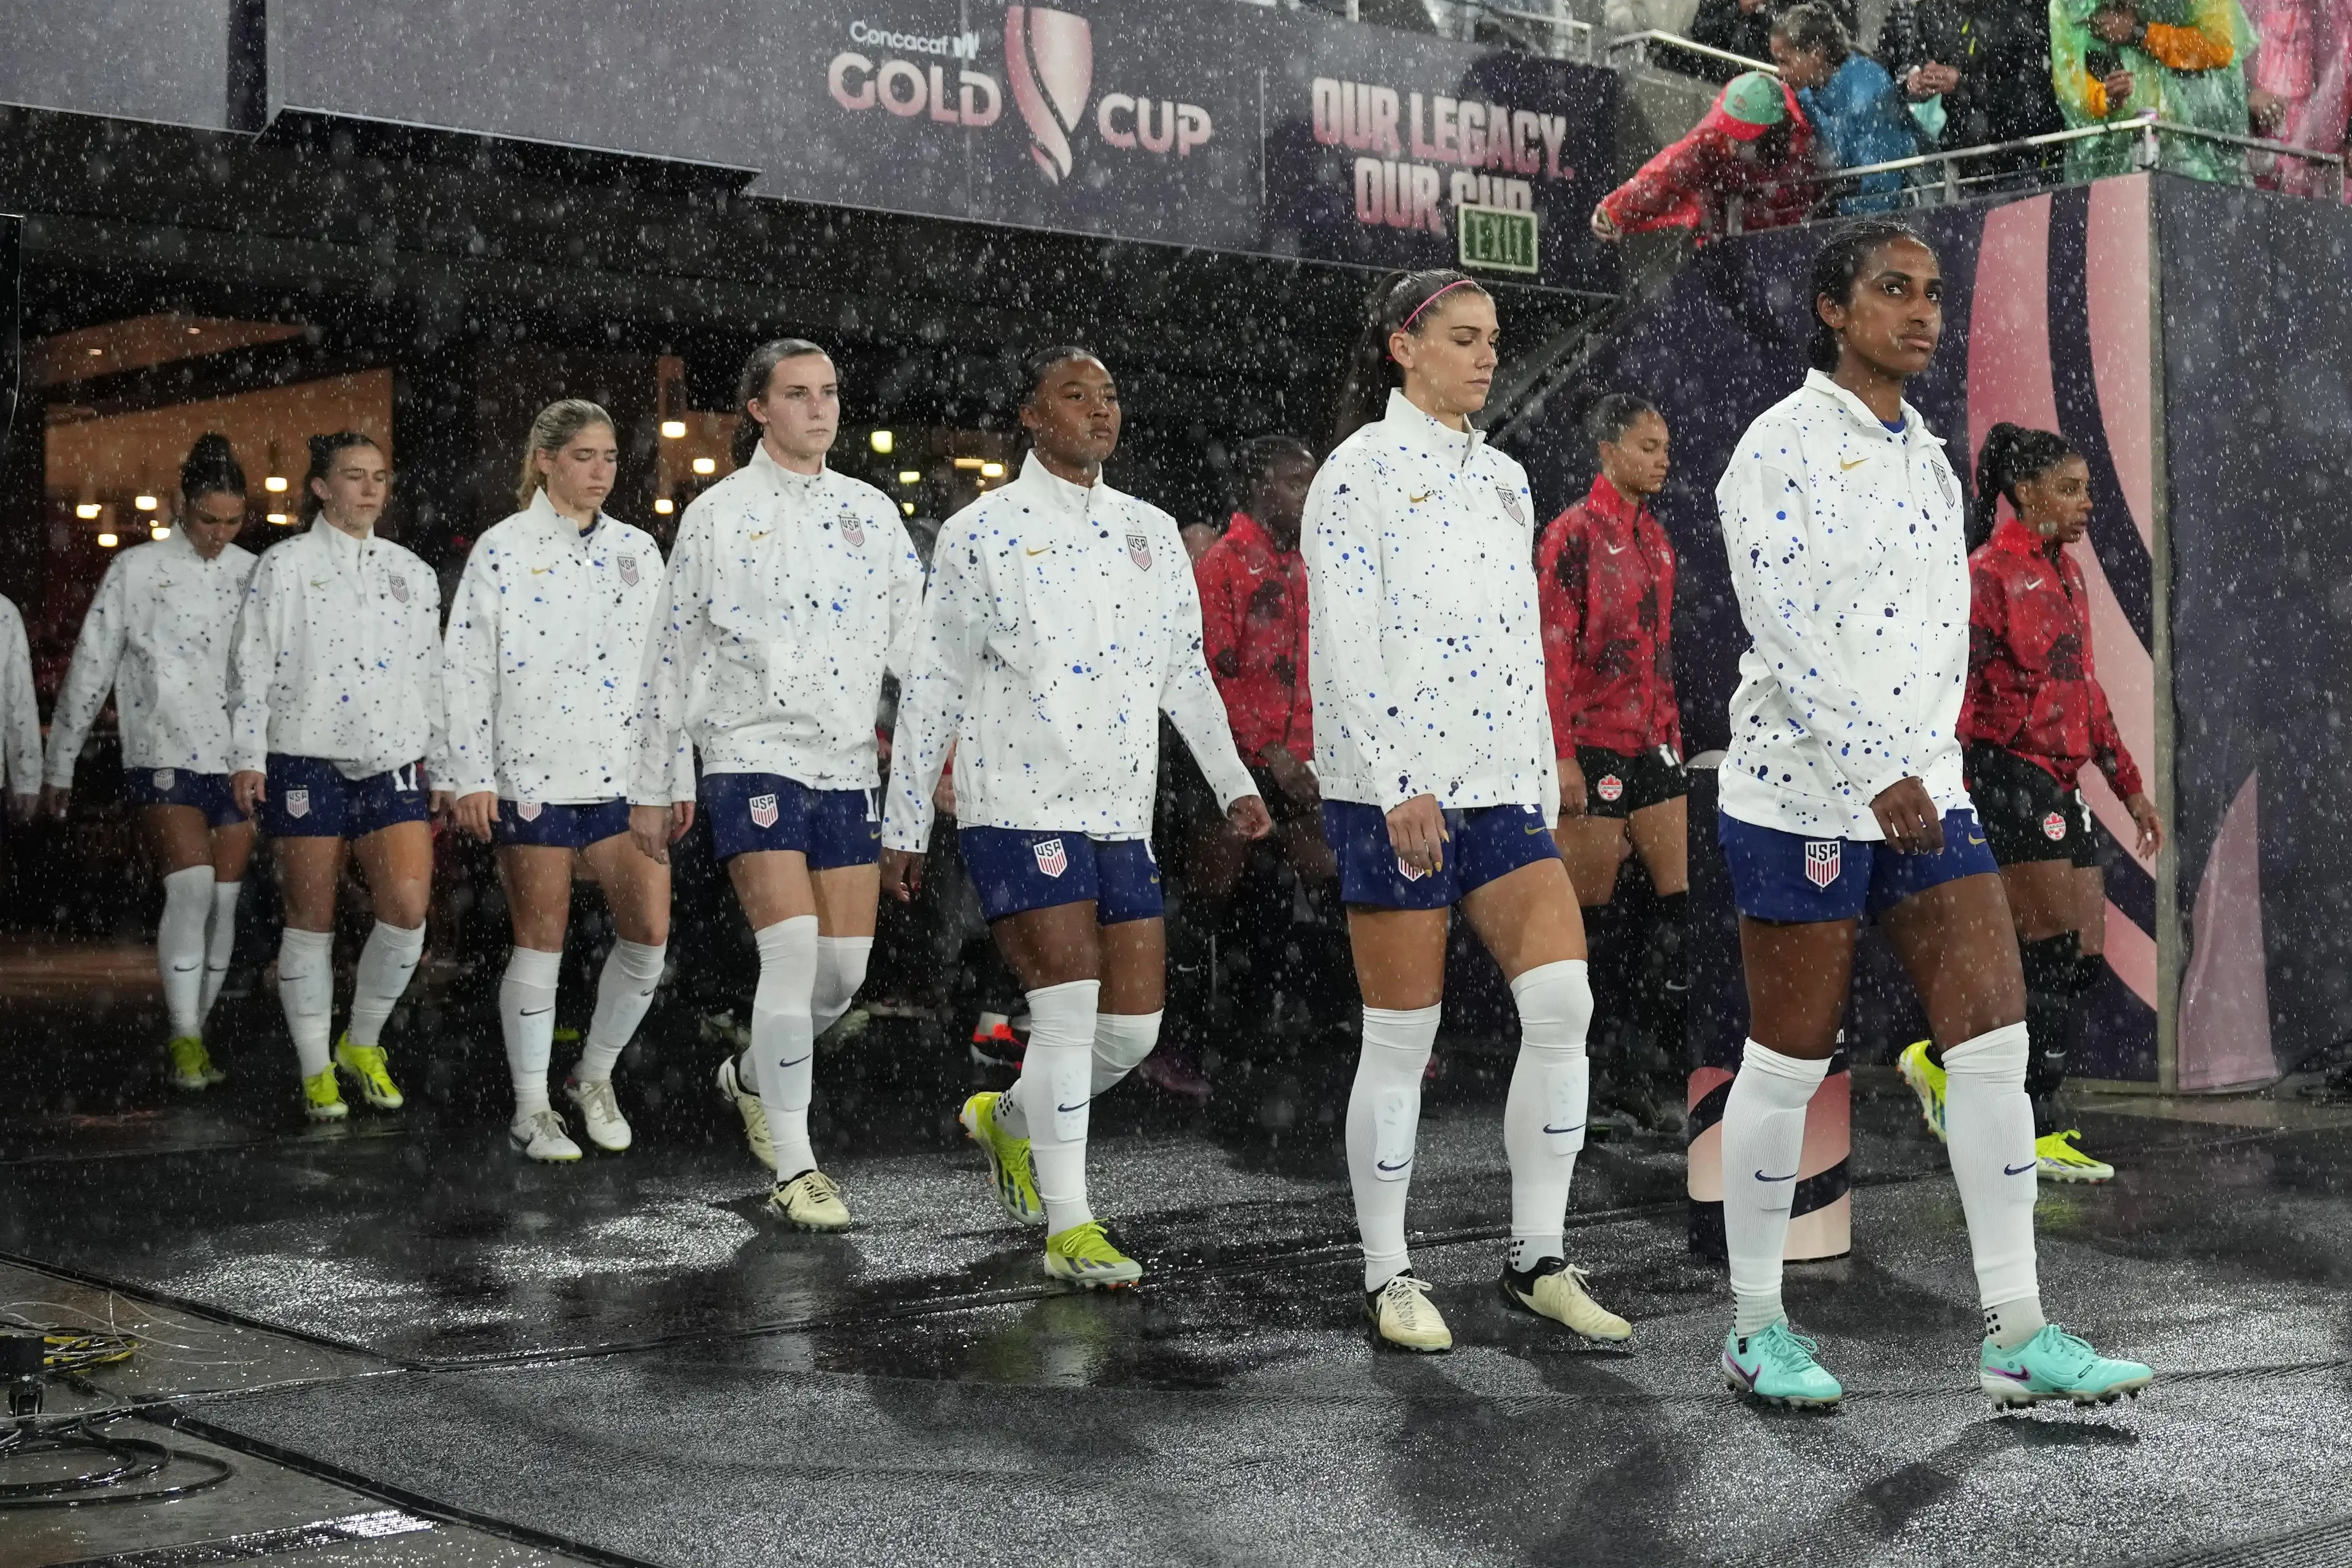 USWNT vs Canada Weather: World Cup Winners Sam Mewis, Julie Foudy Join Social Media Outcry Over Rainy Conditions